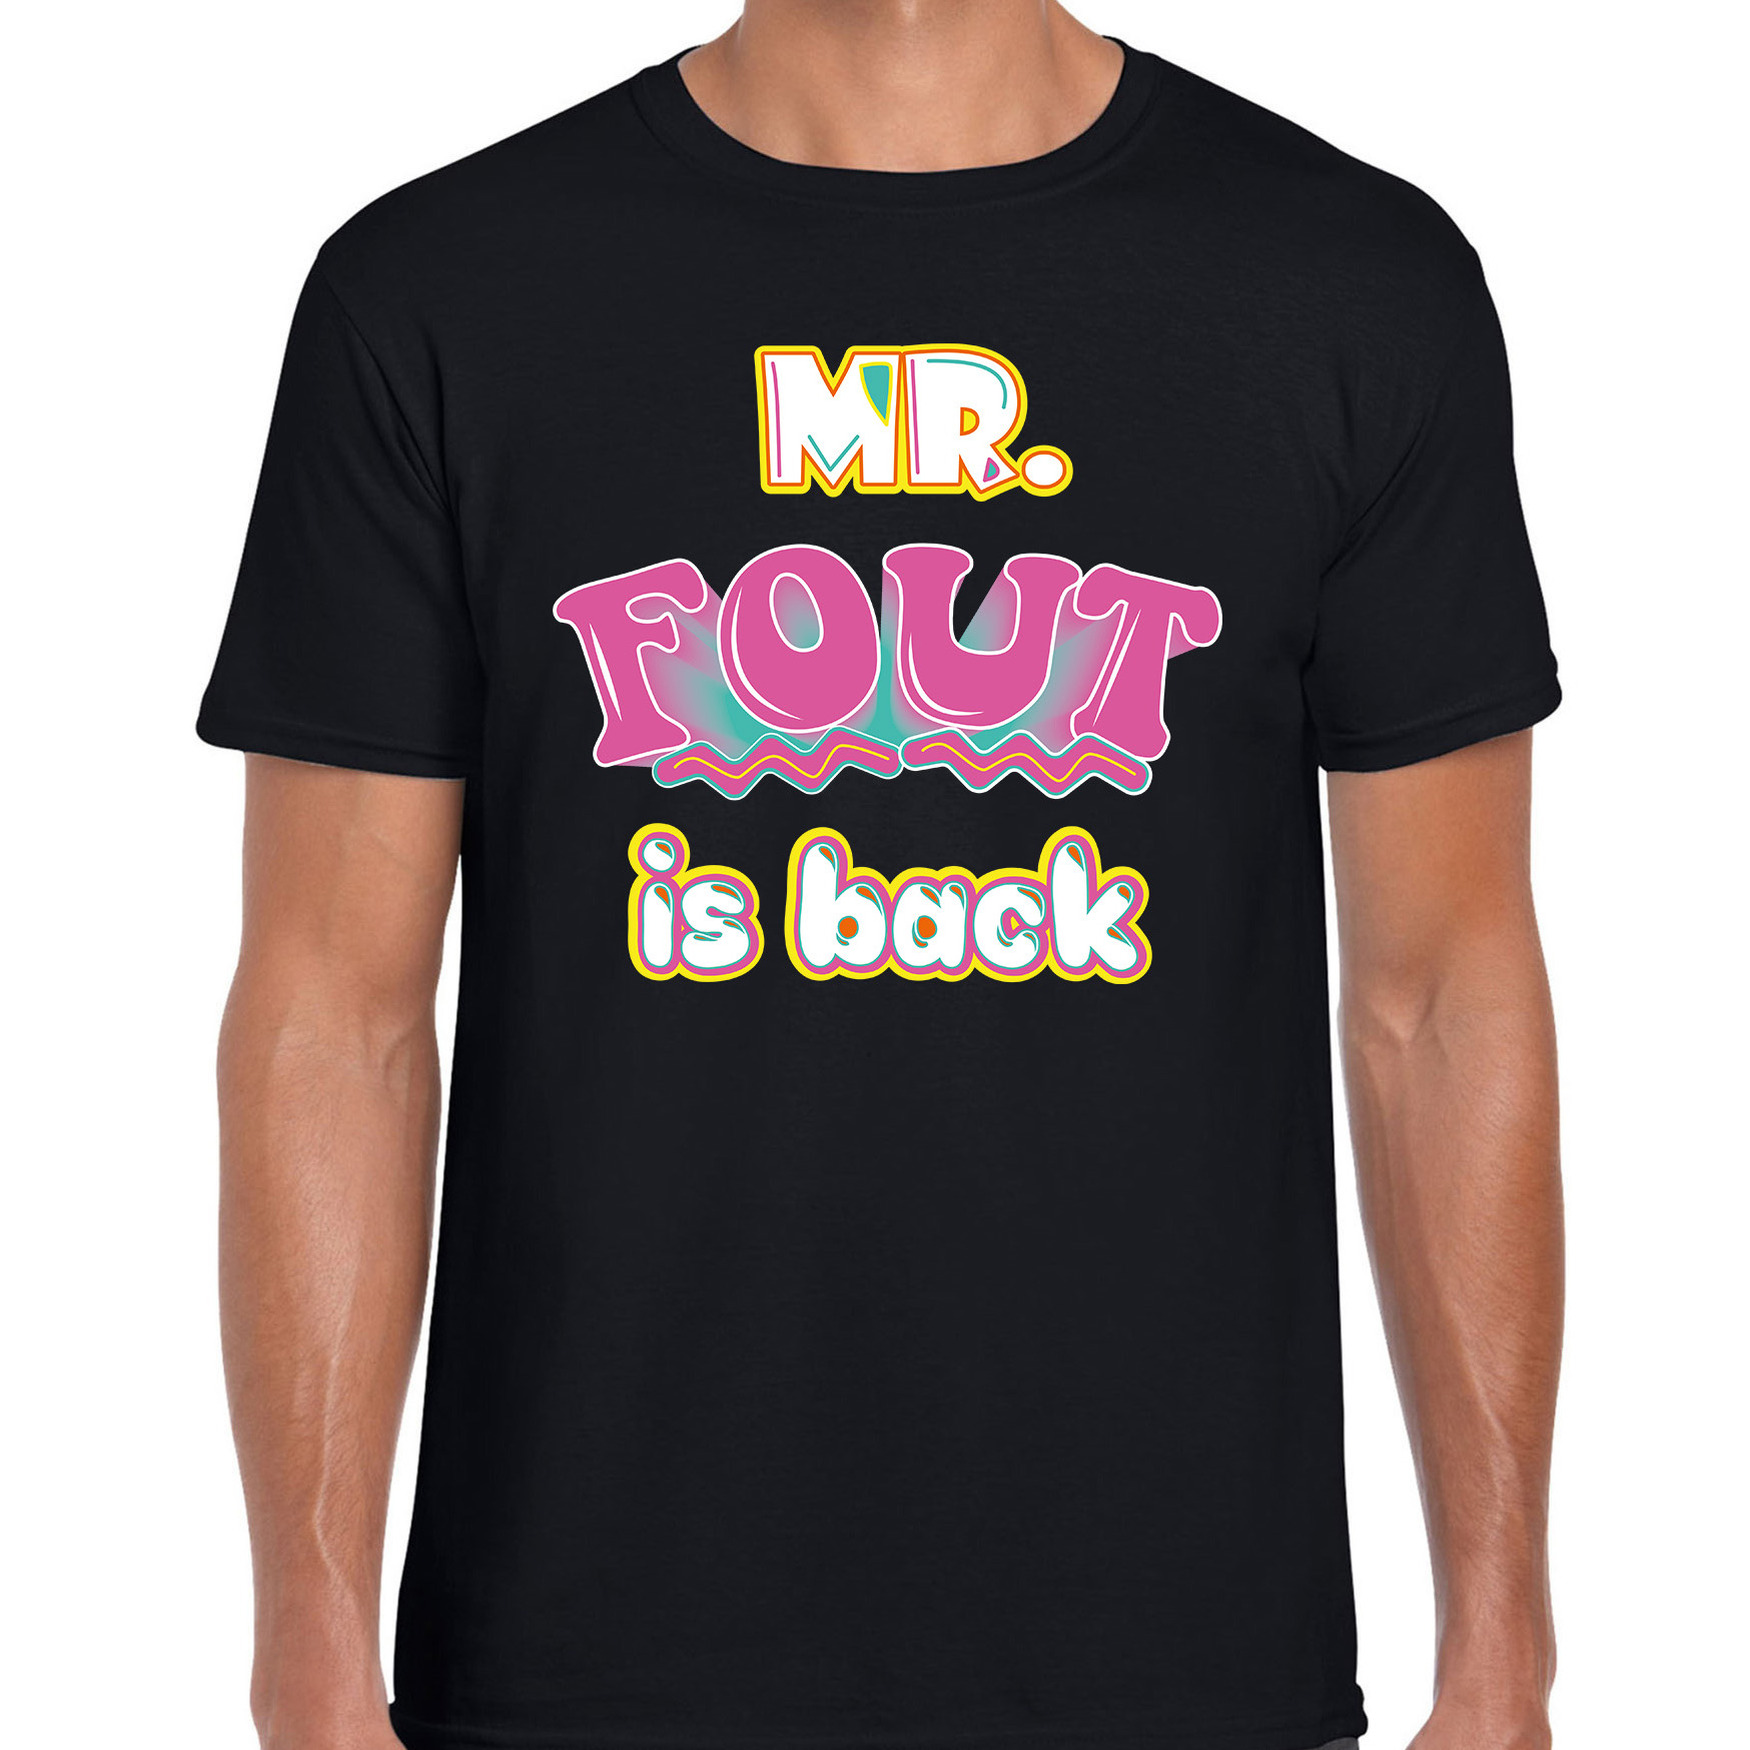 Foute party t-shirt heren zwart foute party outfit-kleding